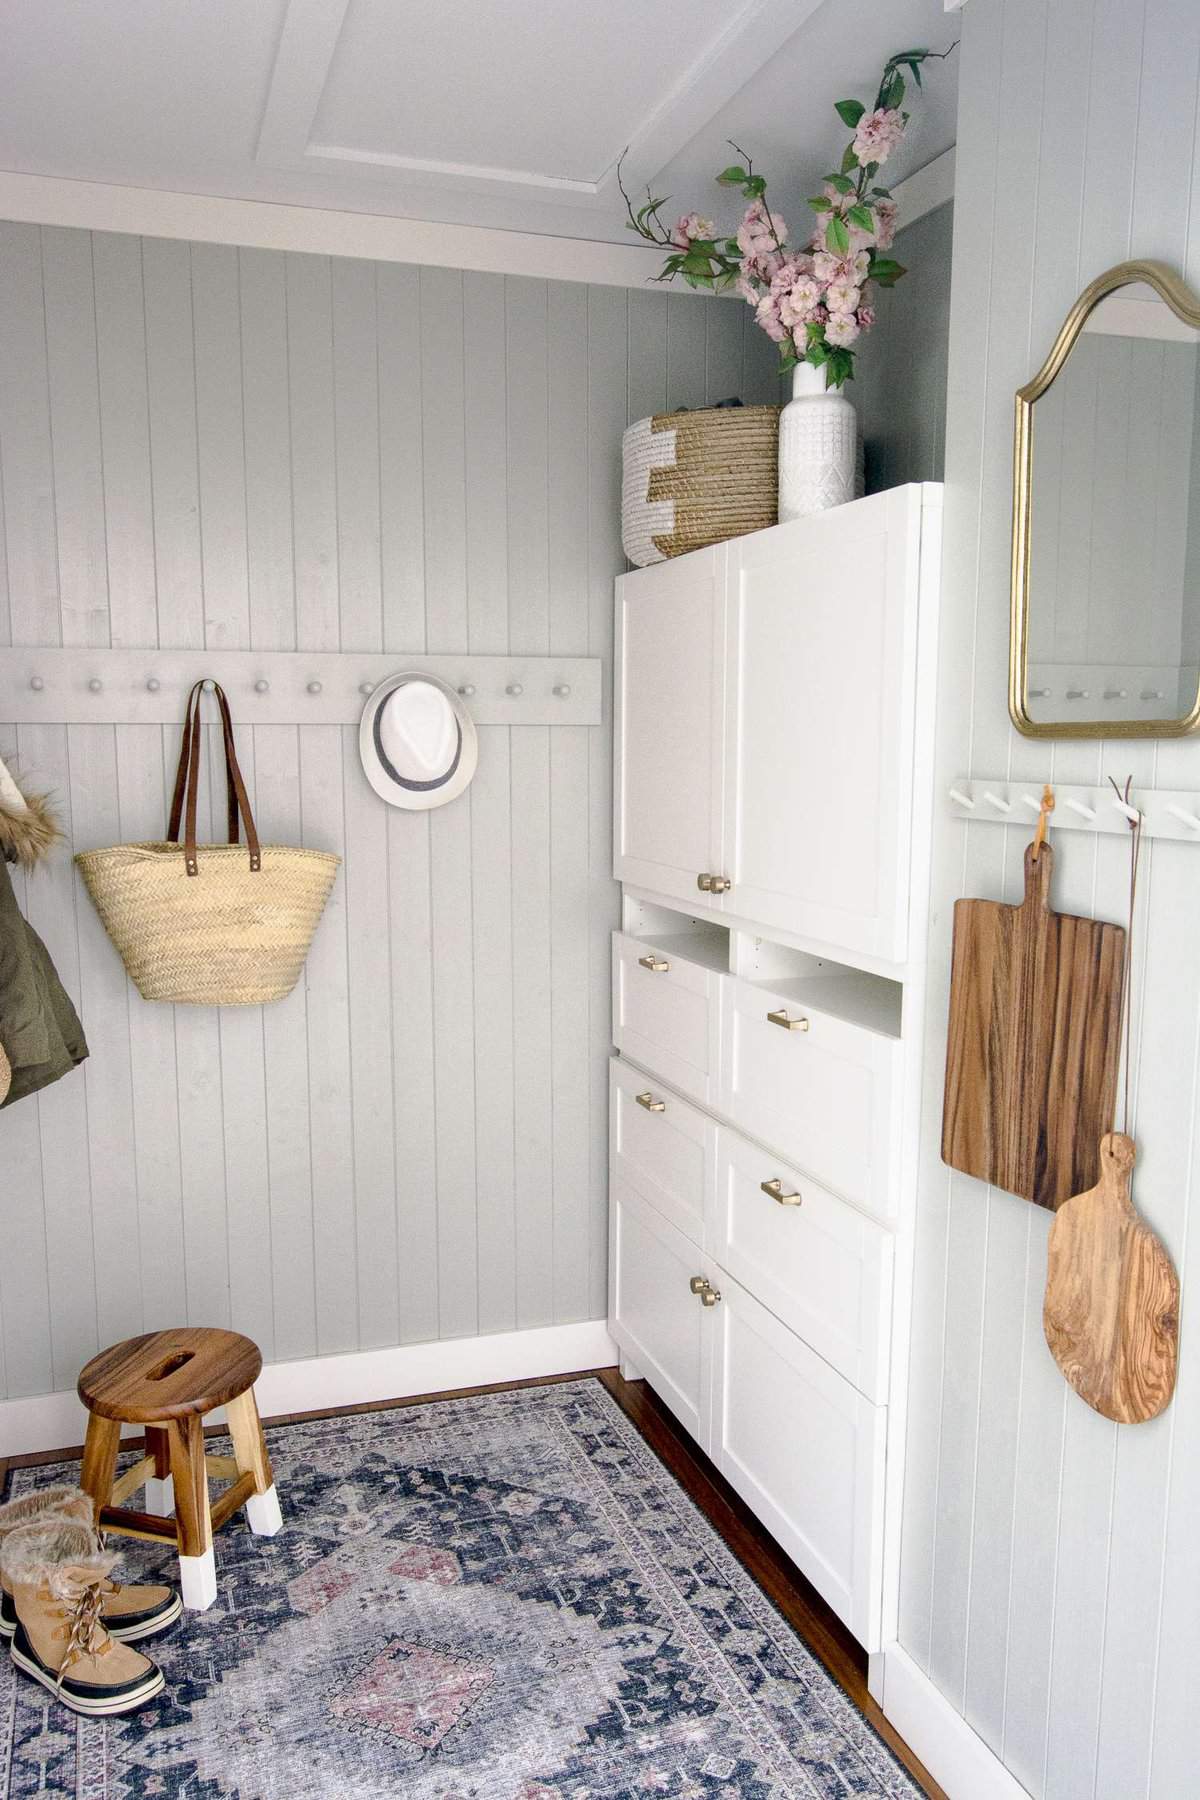 Mudroom Built In Ikea That Saved 2, Entryway Storage Cabinet Ikea